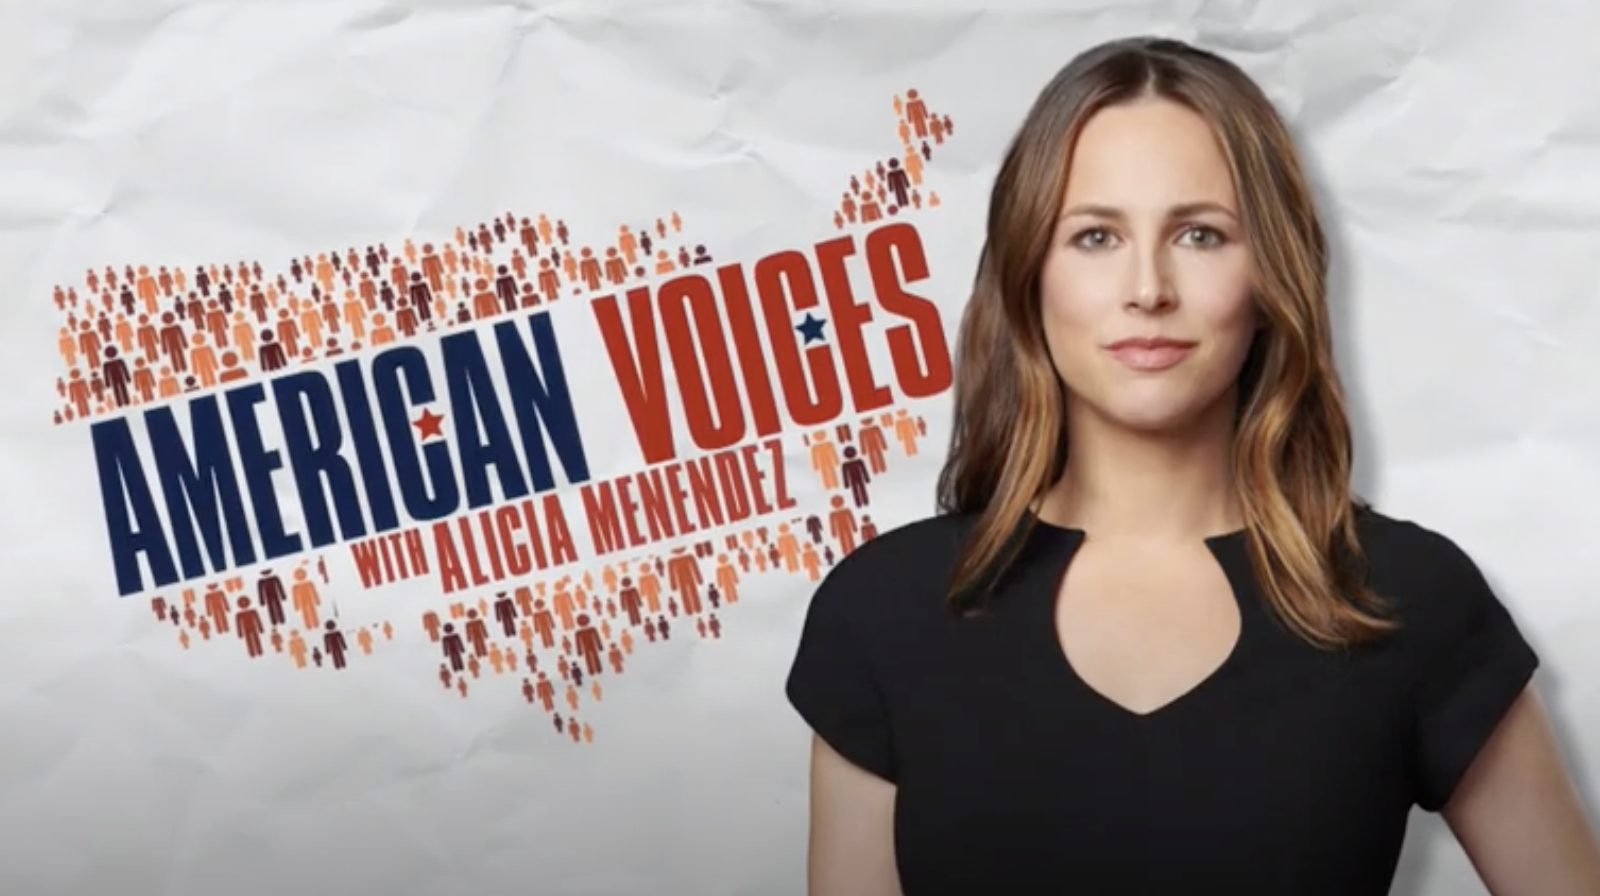 American Voices with Alicia Menendez on MSNBC